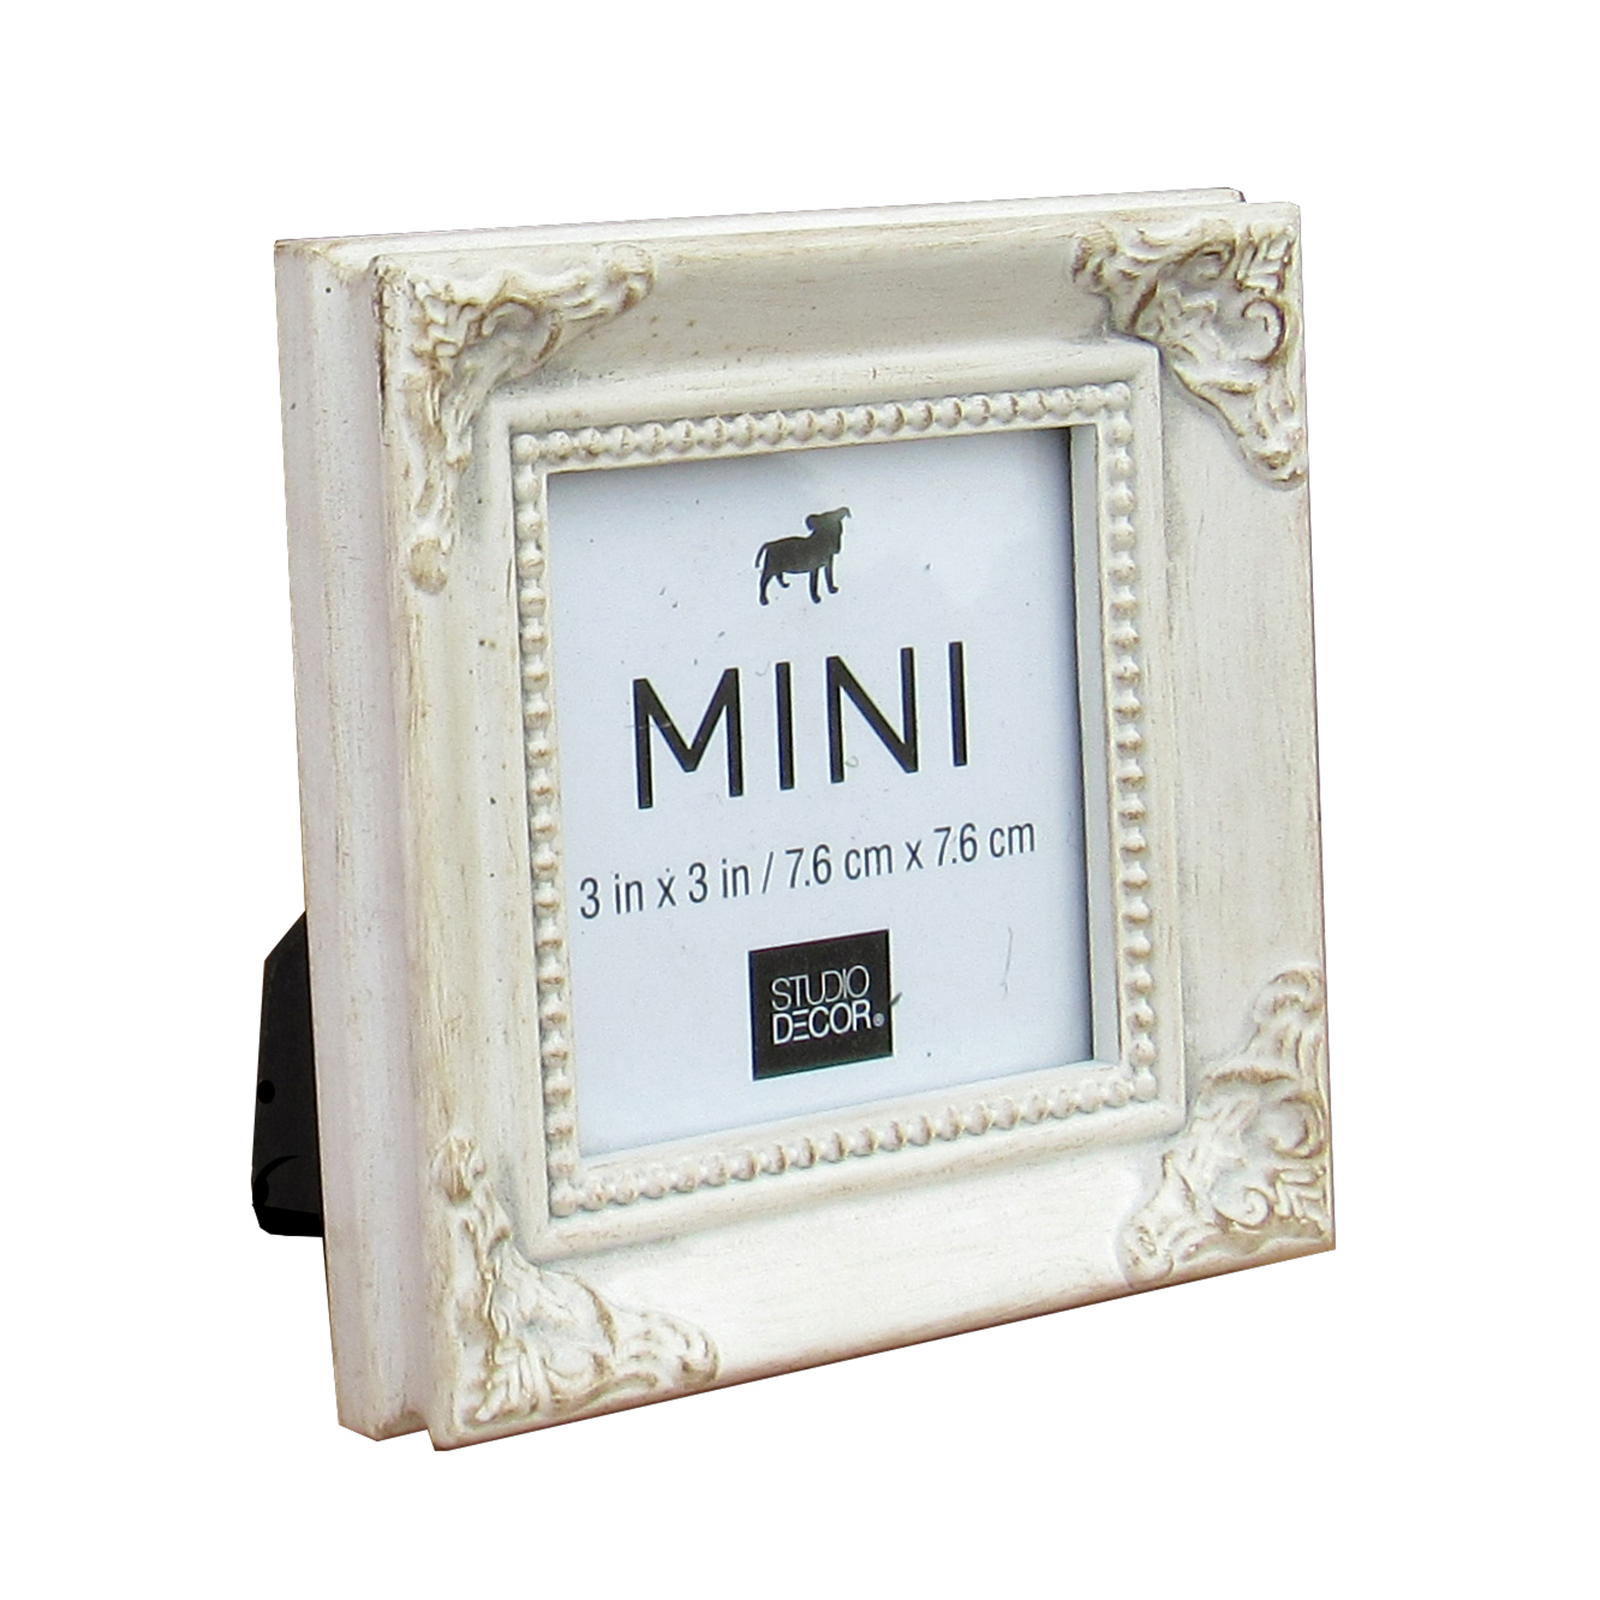 Small picture frames uk